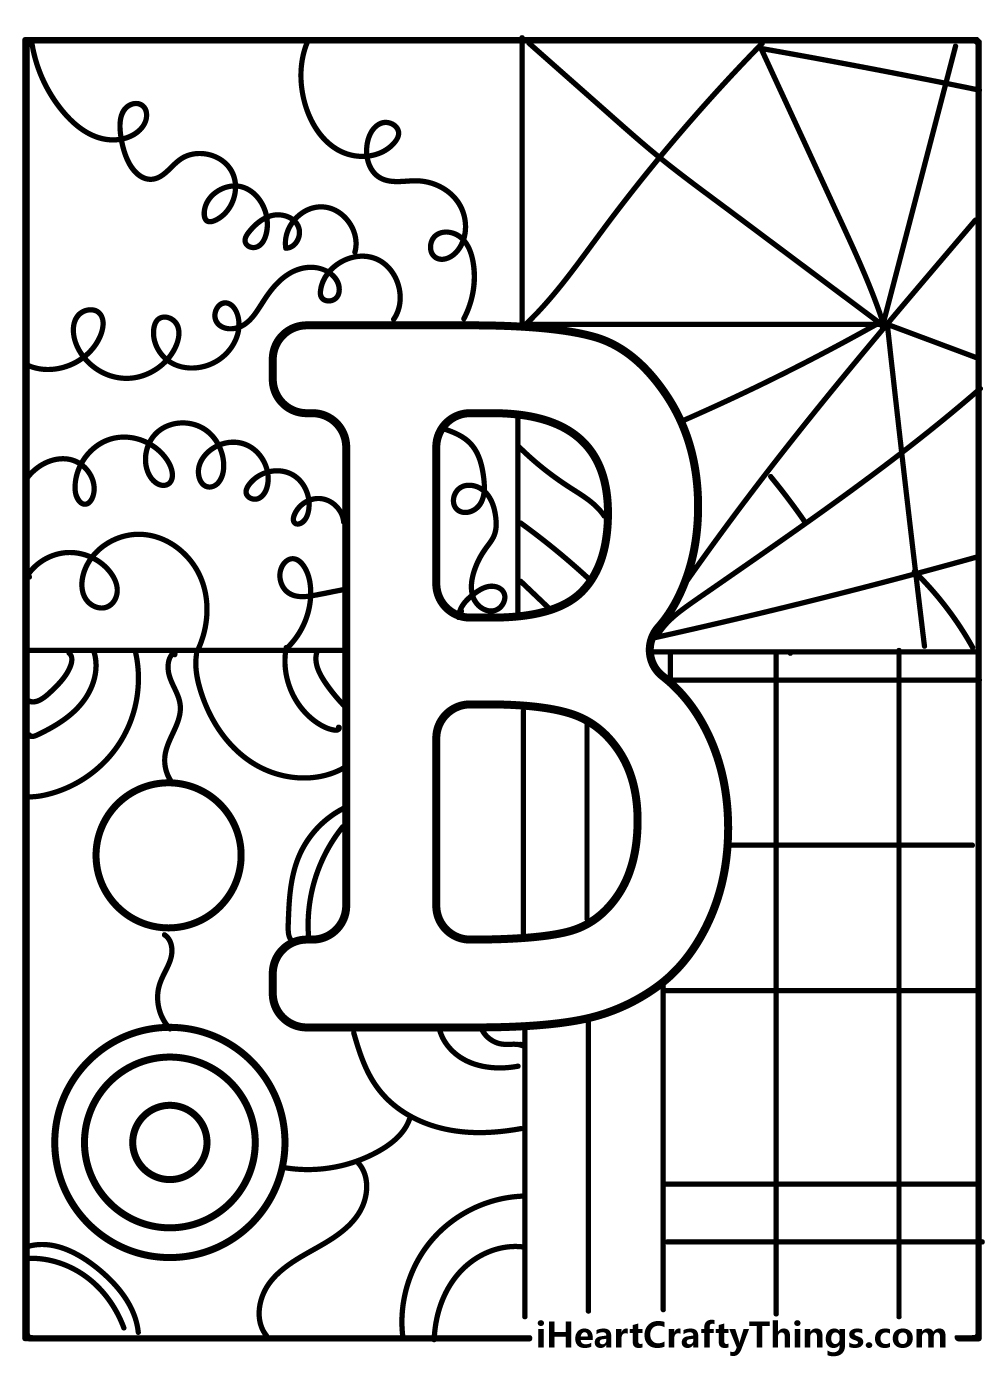 Letter B Coloring Pages for adults free printable